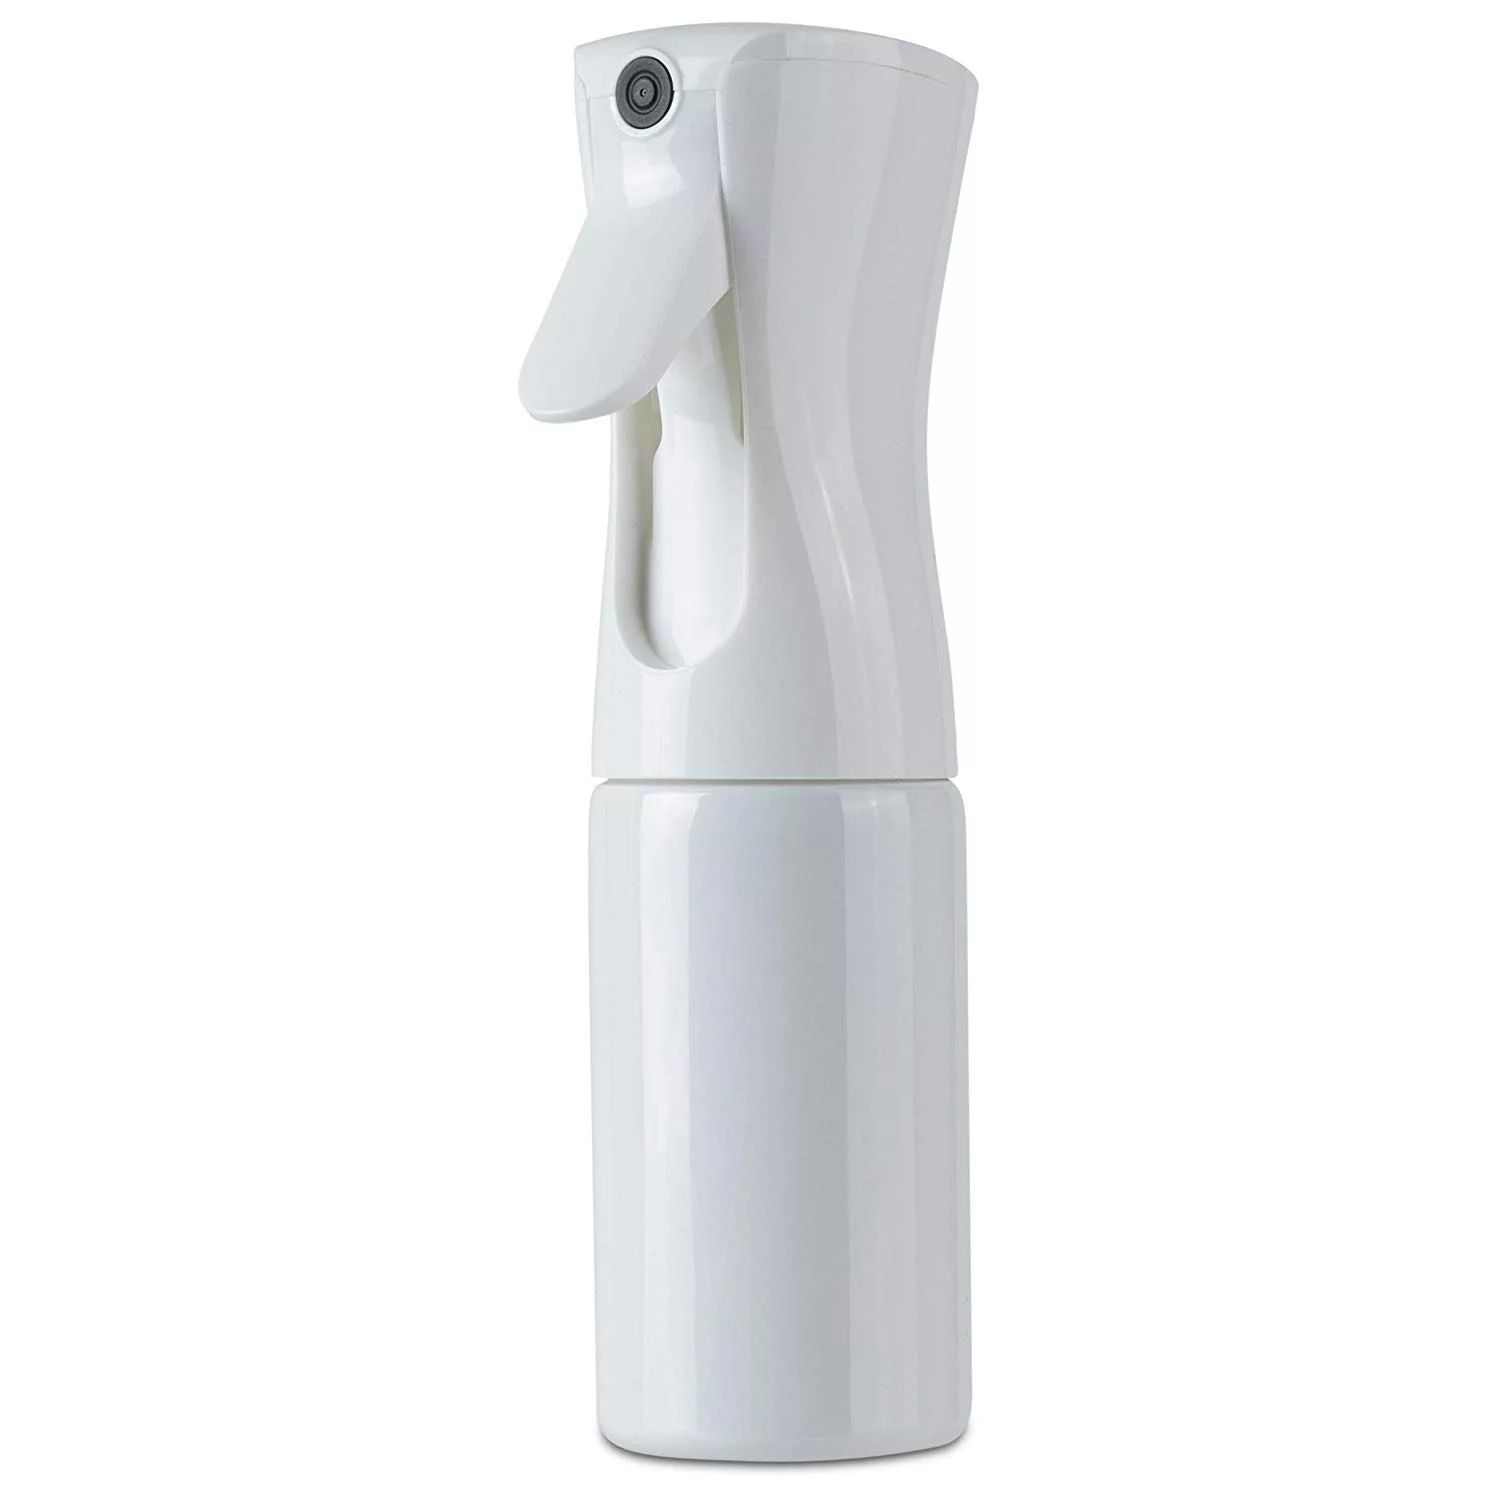 Hair Spray Misting Bottle - Ultra Fine Continuous Mist Sprayer For Hairstyling, Cleaning, Plants ... | Walmart (US)